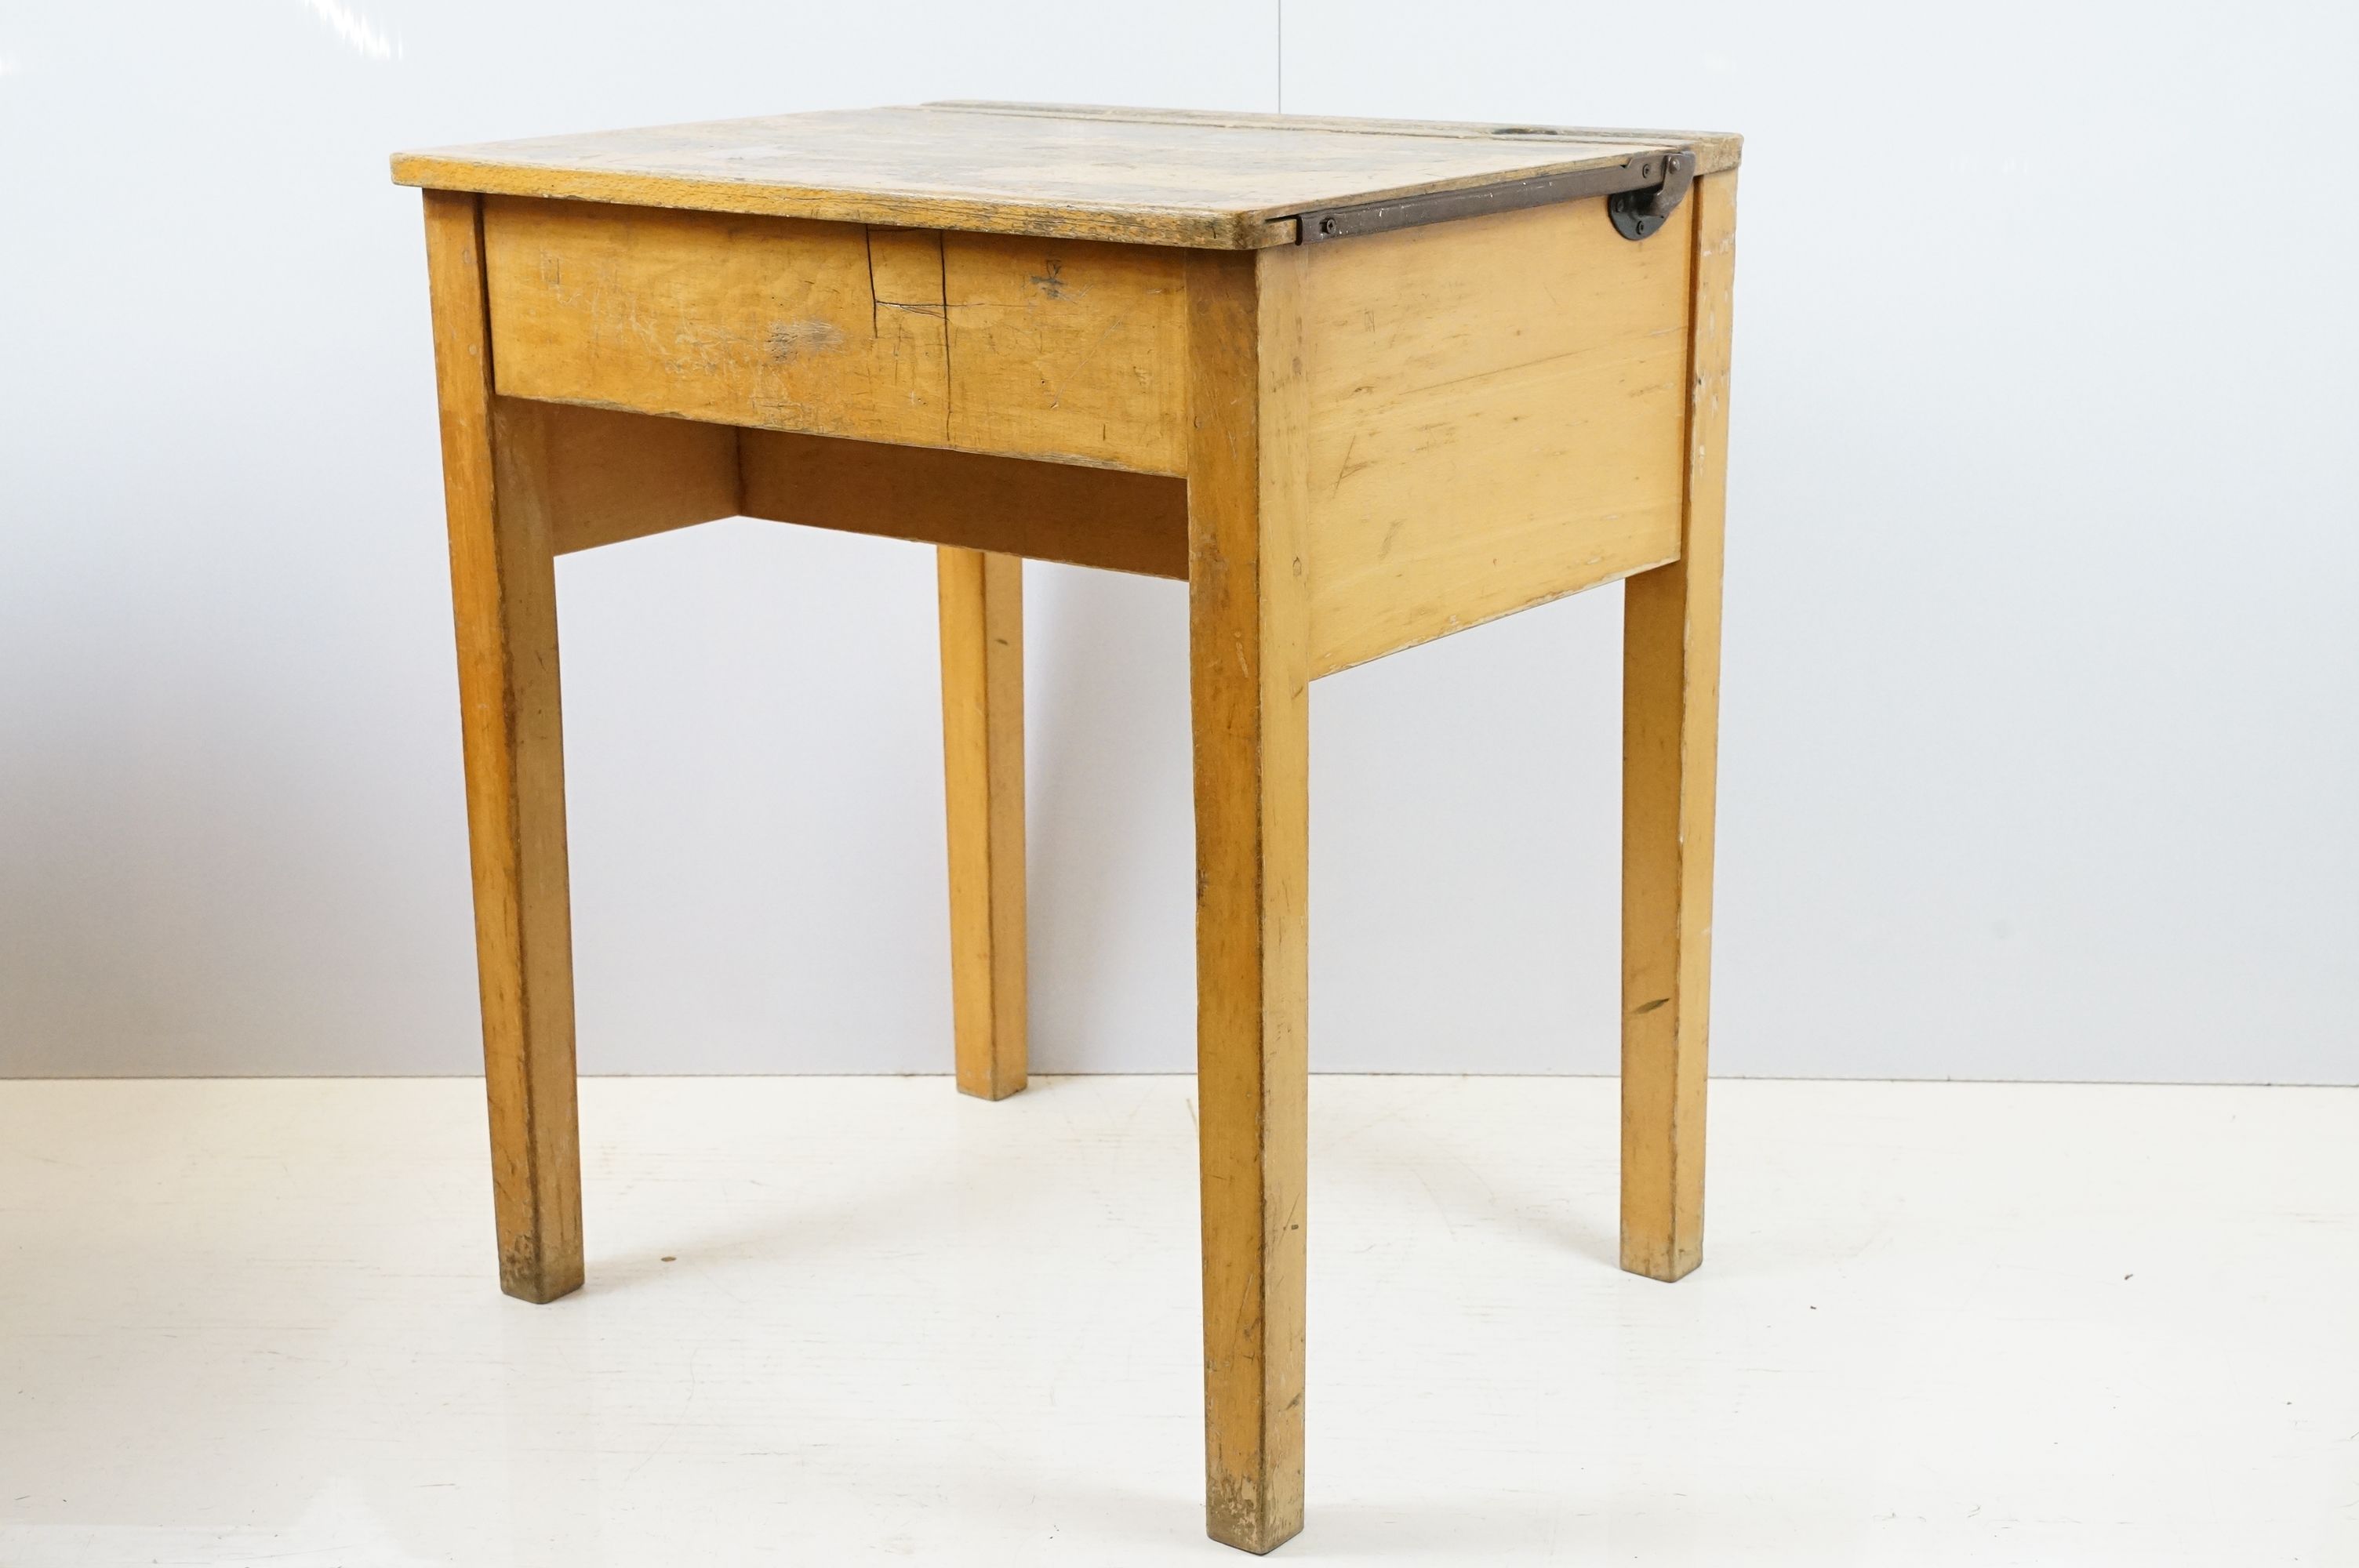 Two mid century school desks and chairs, the desks - 71cm high x 60.5cm wide x 50.5cm deep - Image 7 of 14